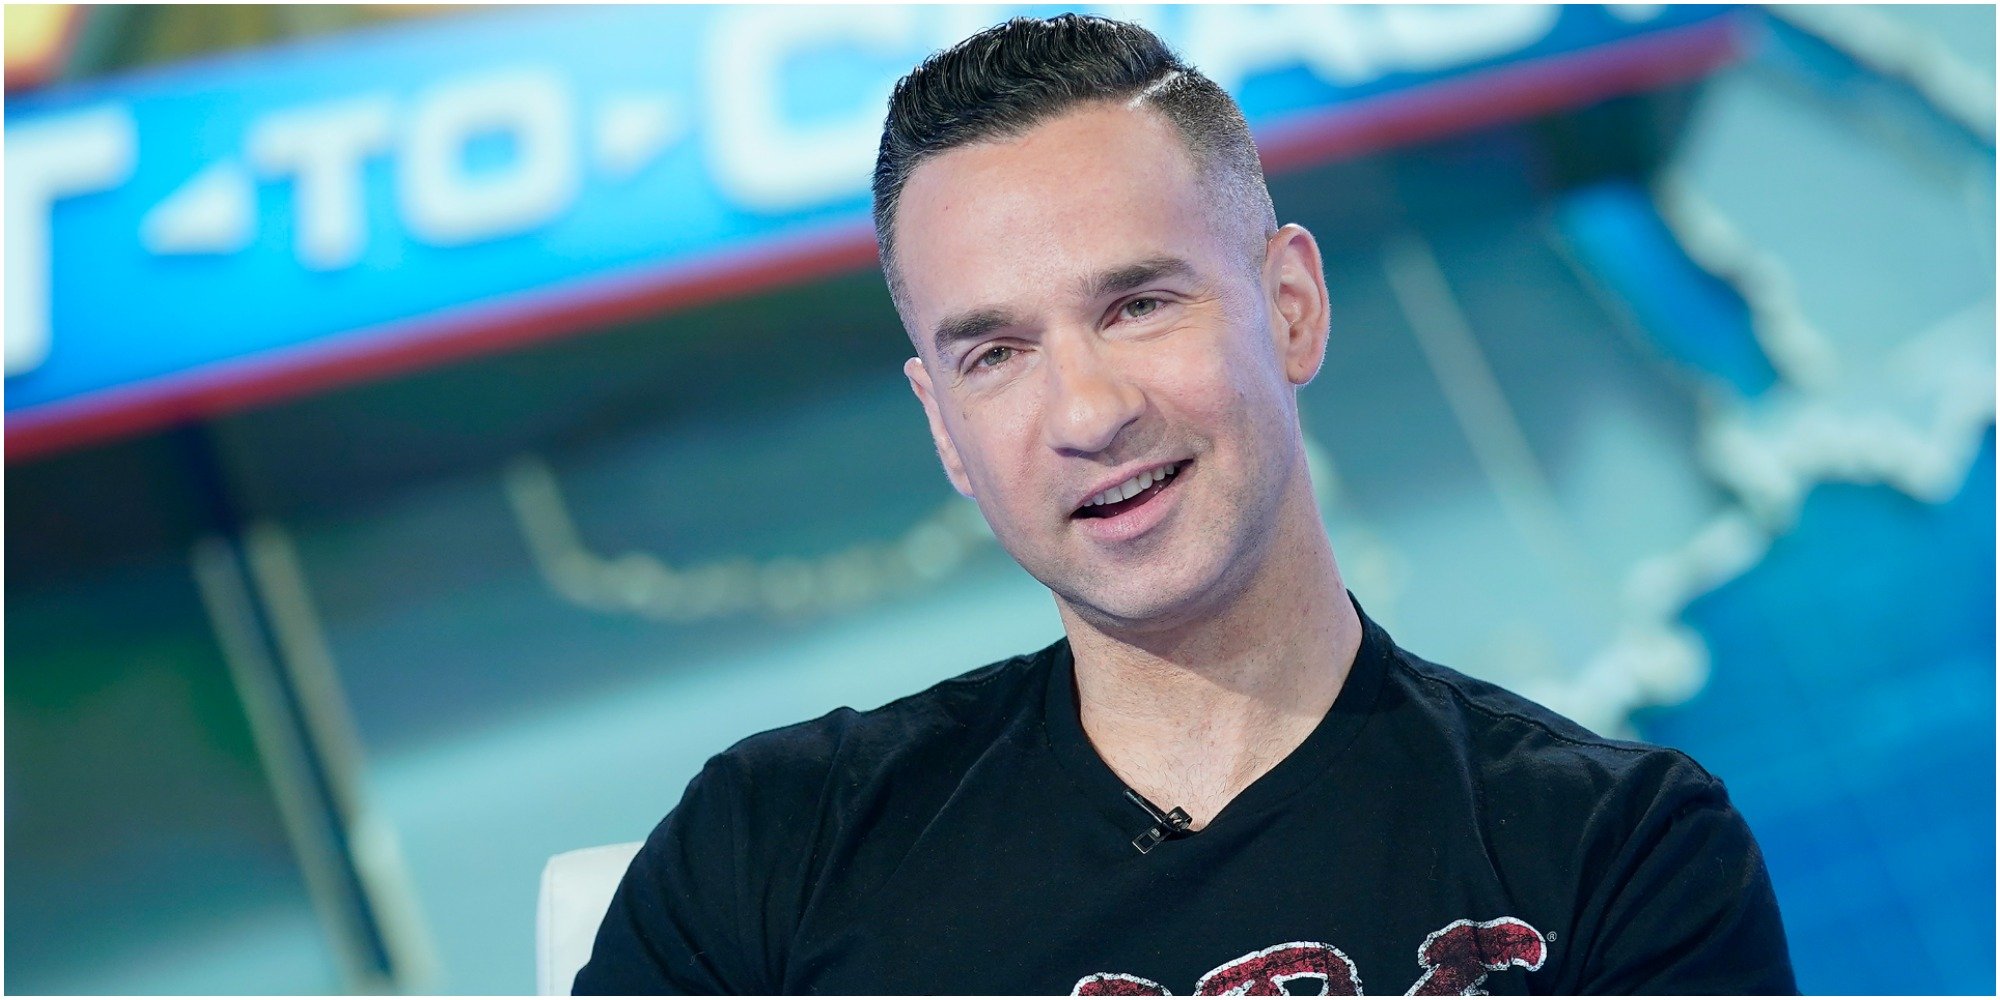 Mike Sorrentino visits "Side by side cavuto" at Fox Business Network Studios.